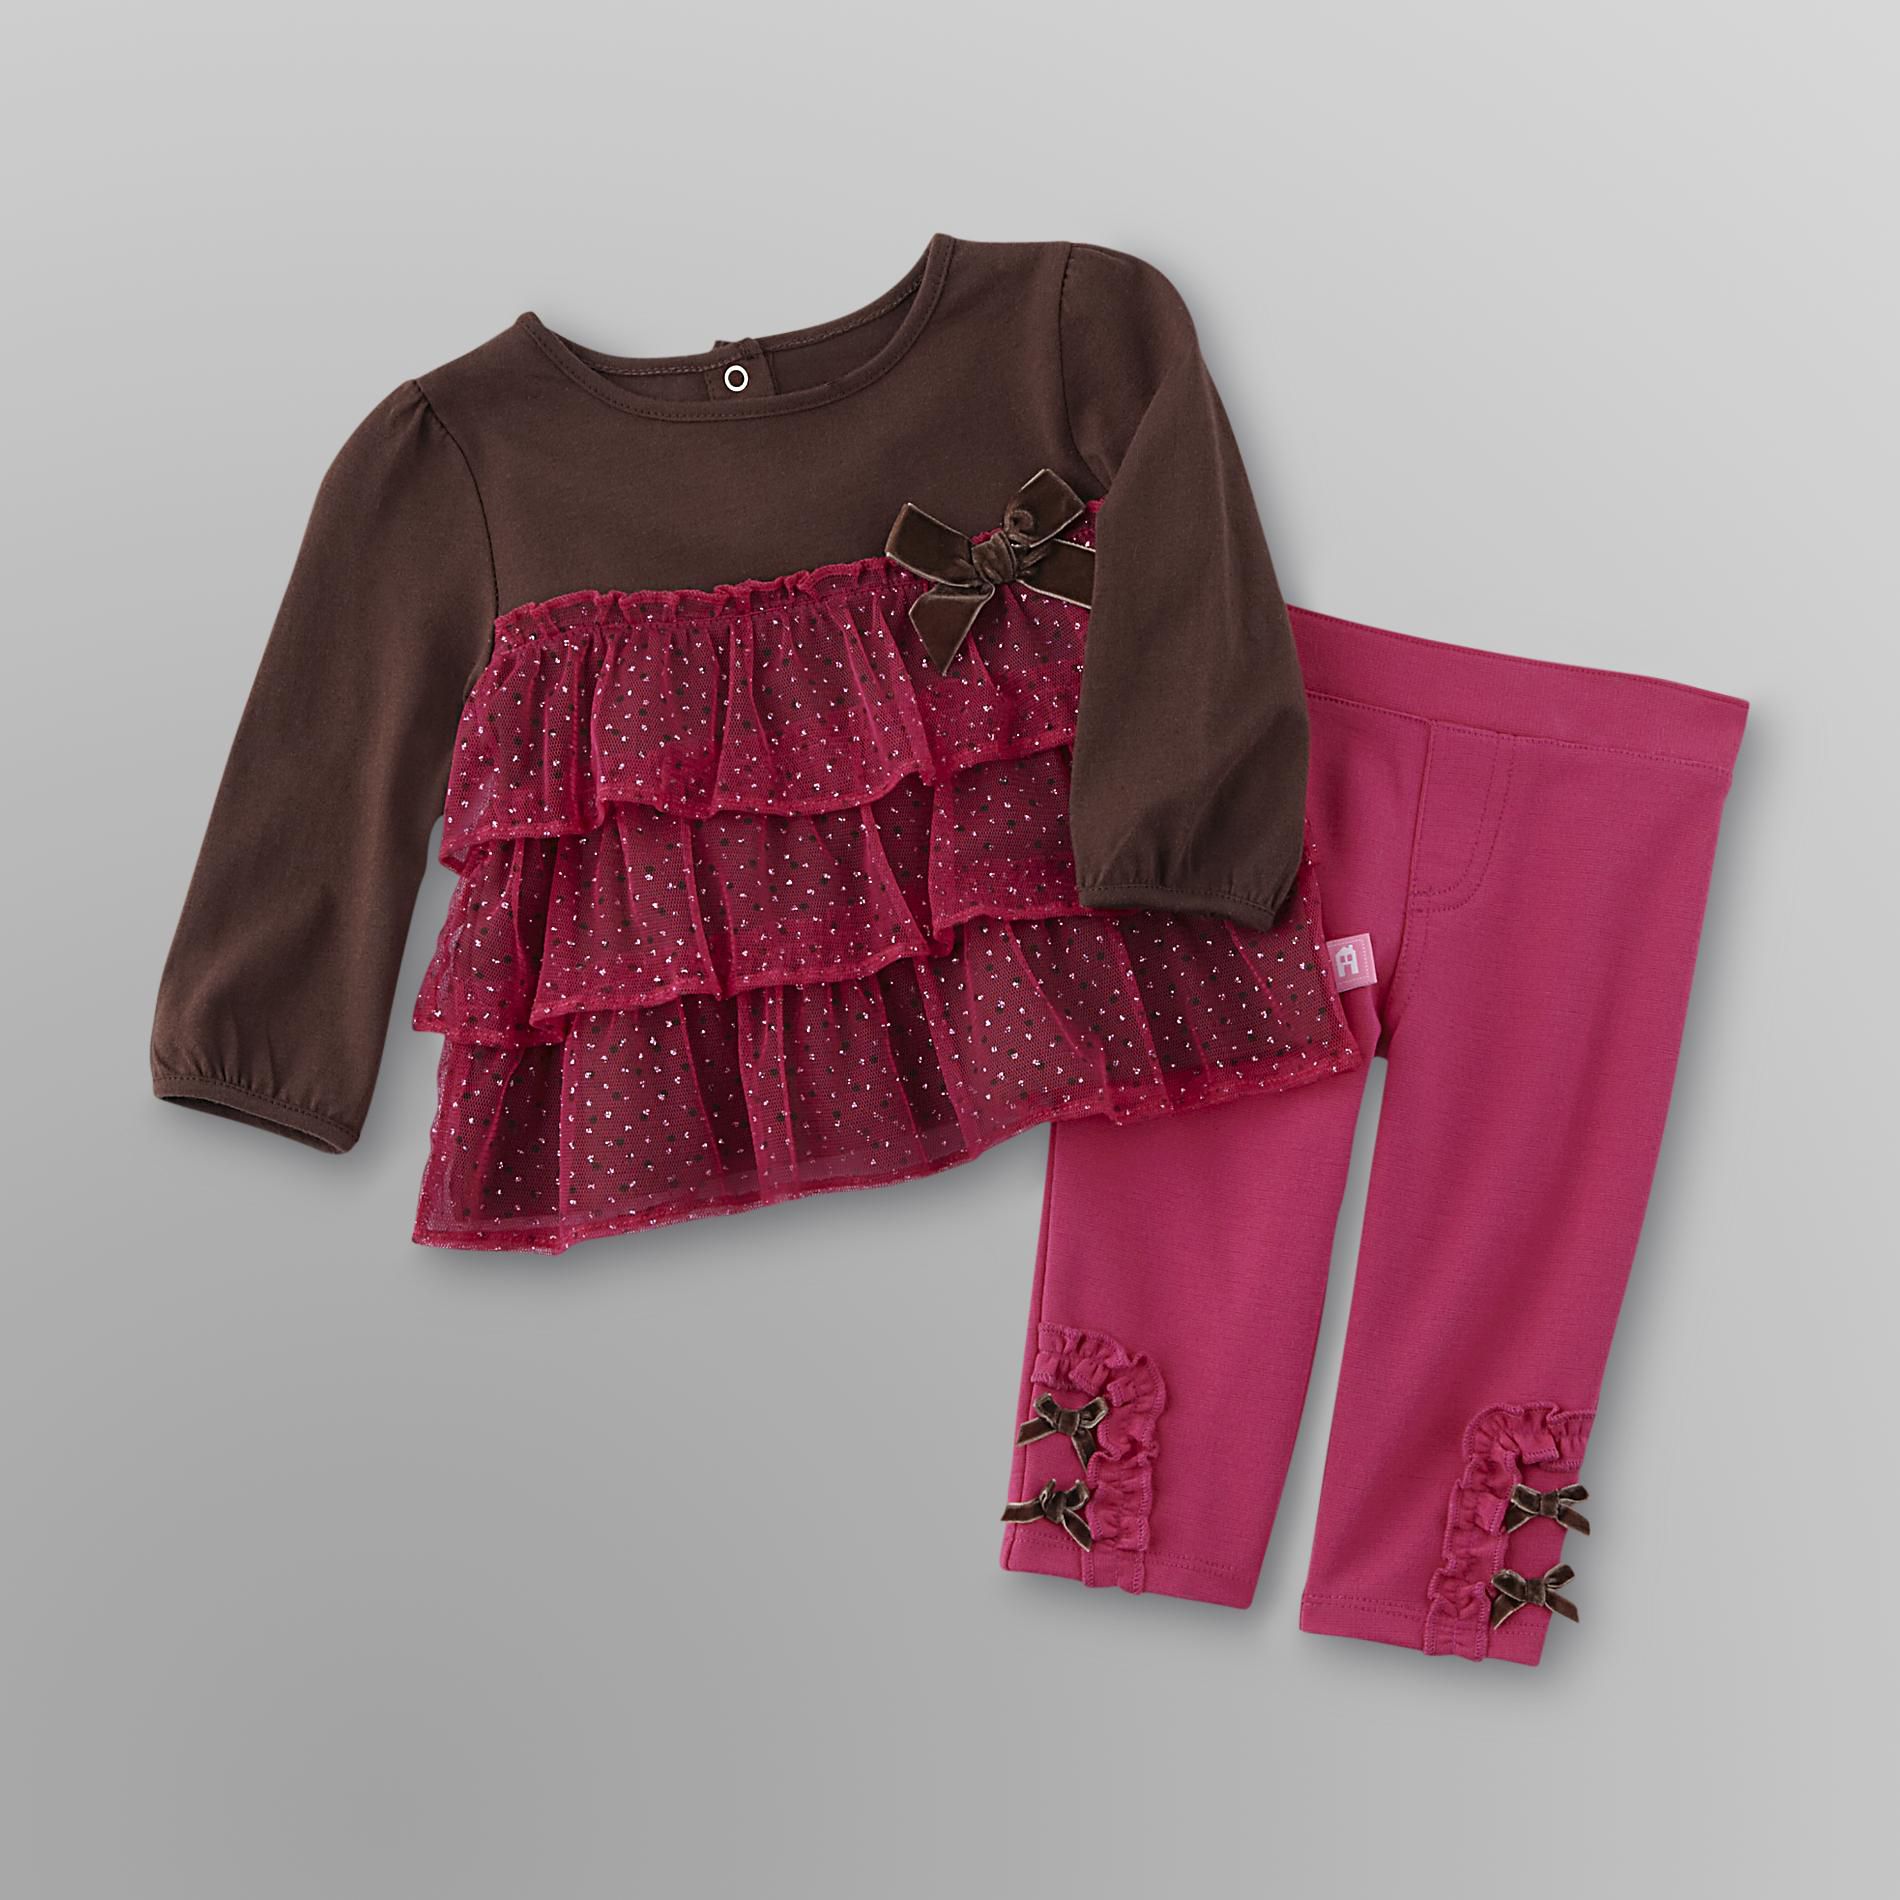 Miniville Infant Girl's Set - Bows and Ruffles